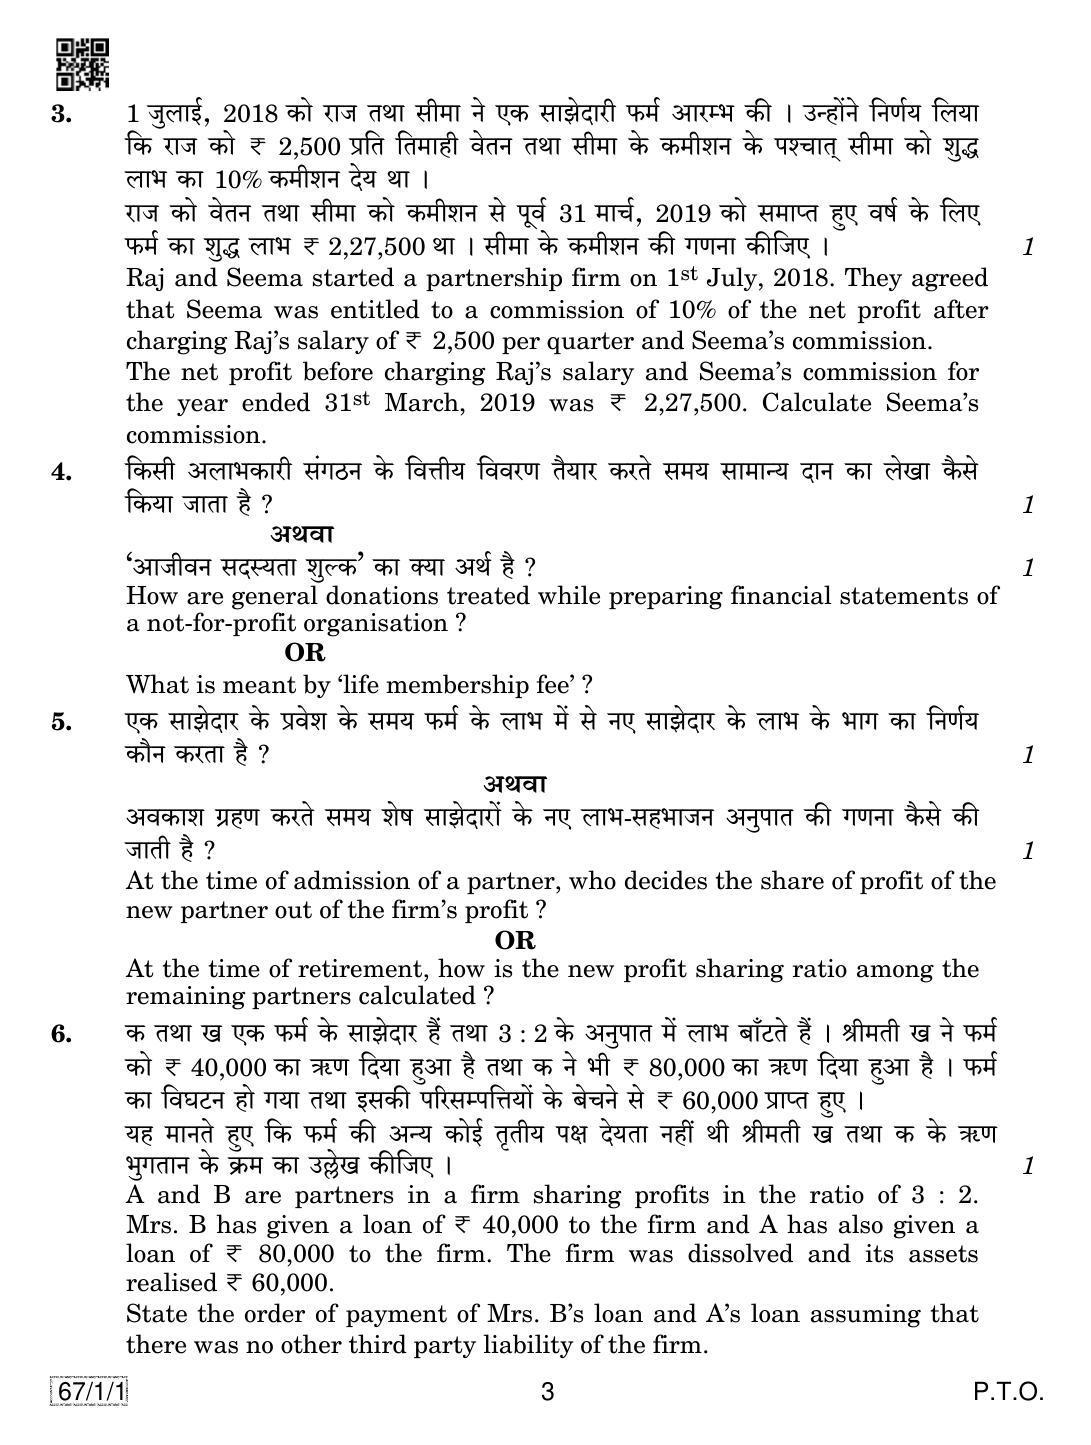 CBSE Class 12 67-1-1 ACCOUNTANCY 2019 Compartment Question Paper - Page 3